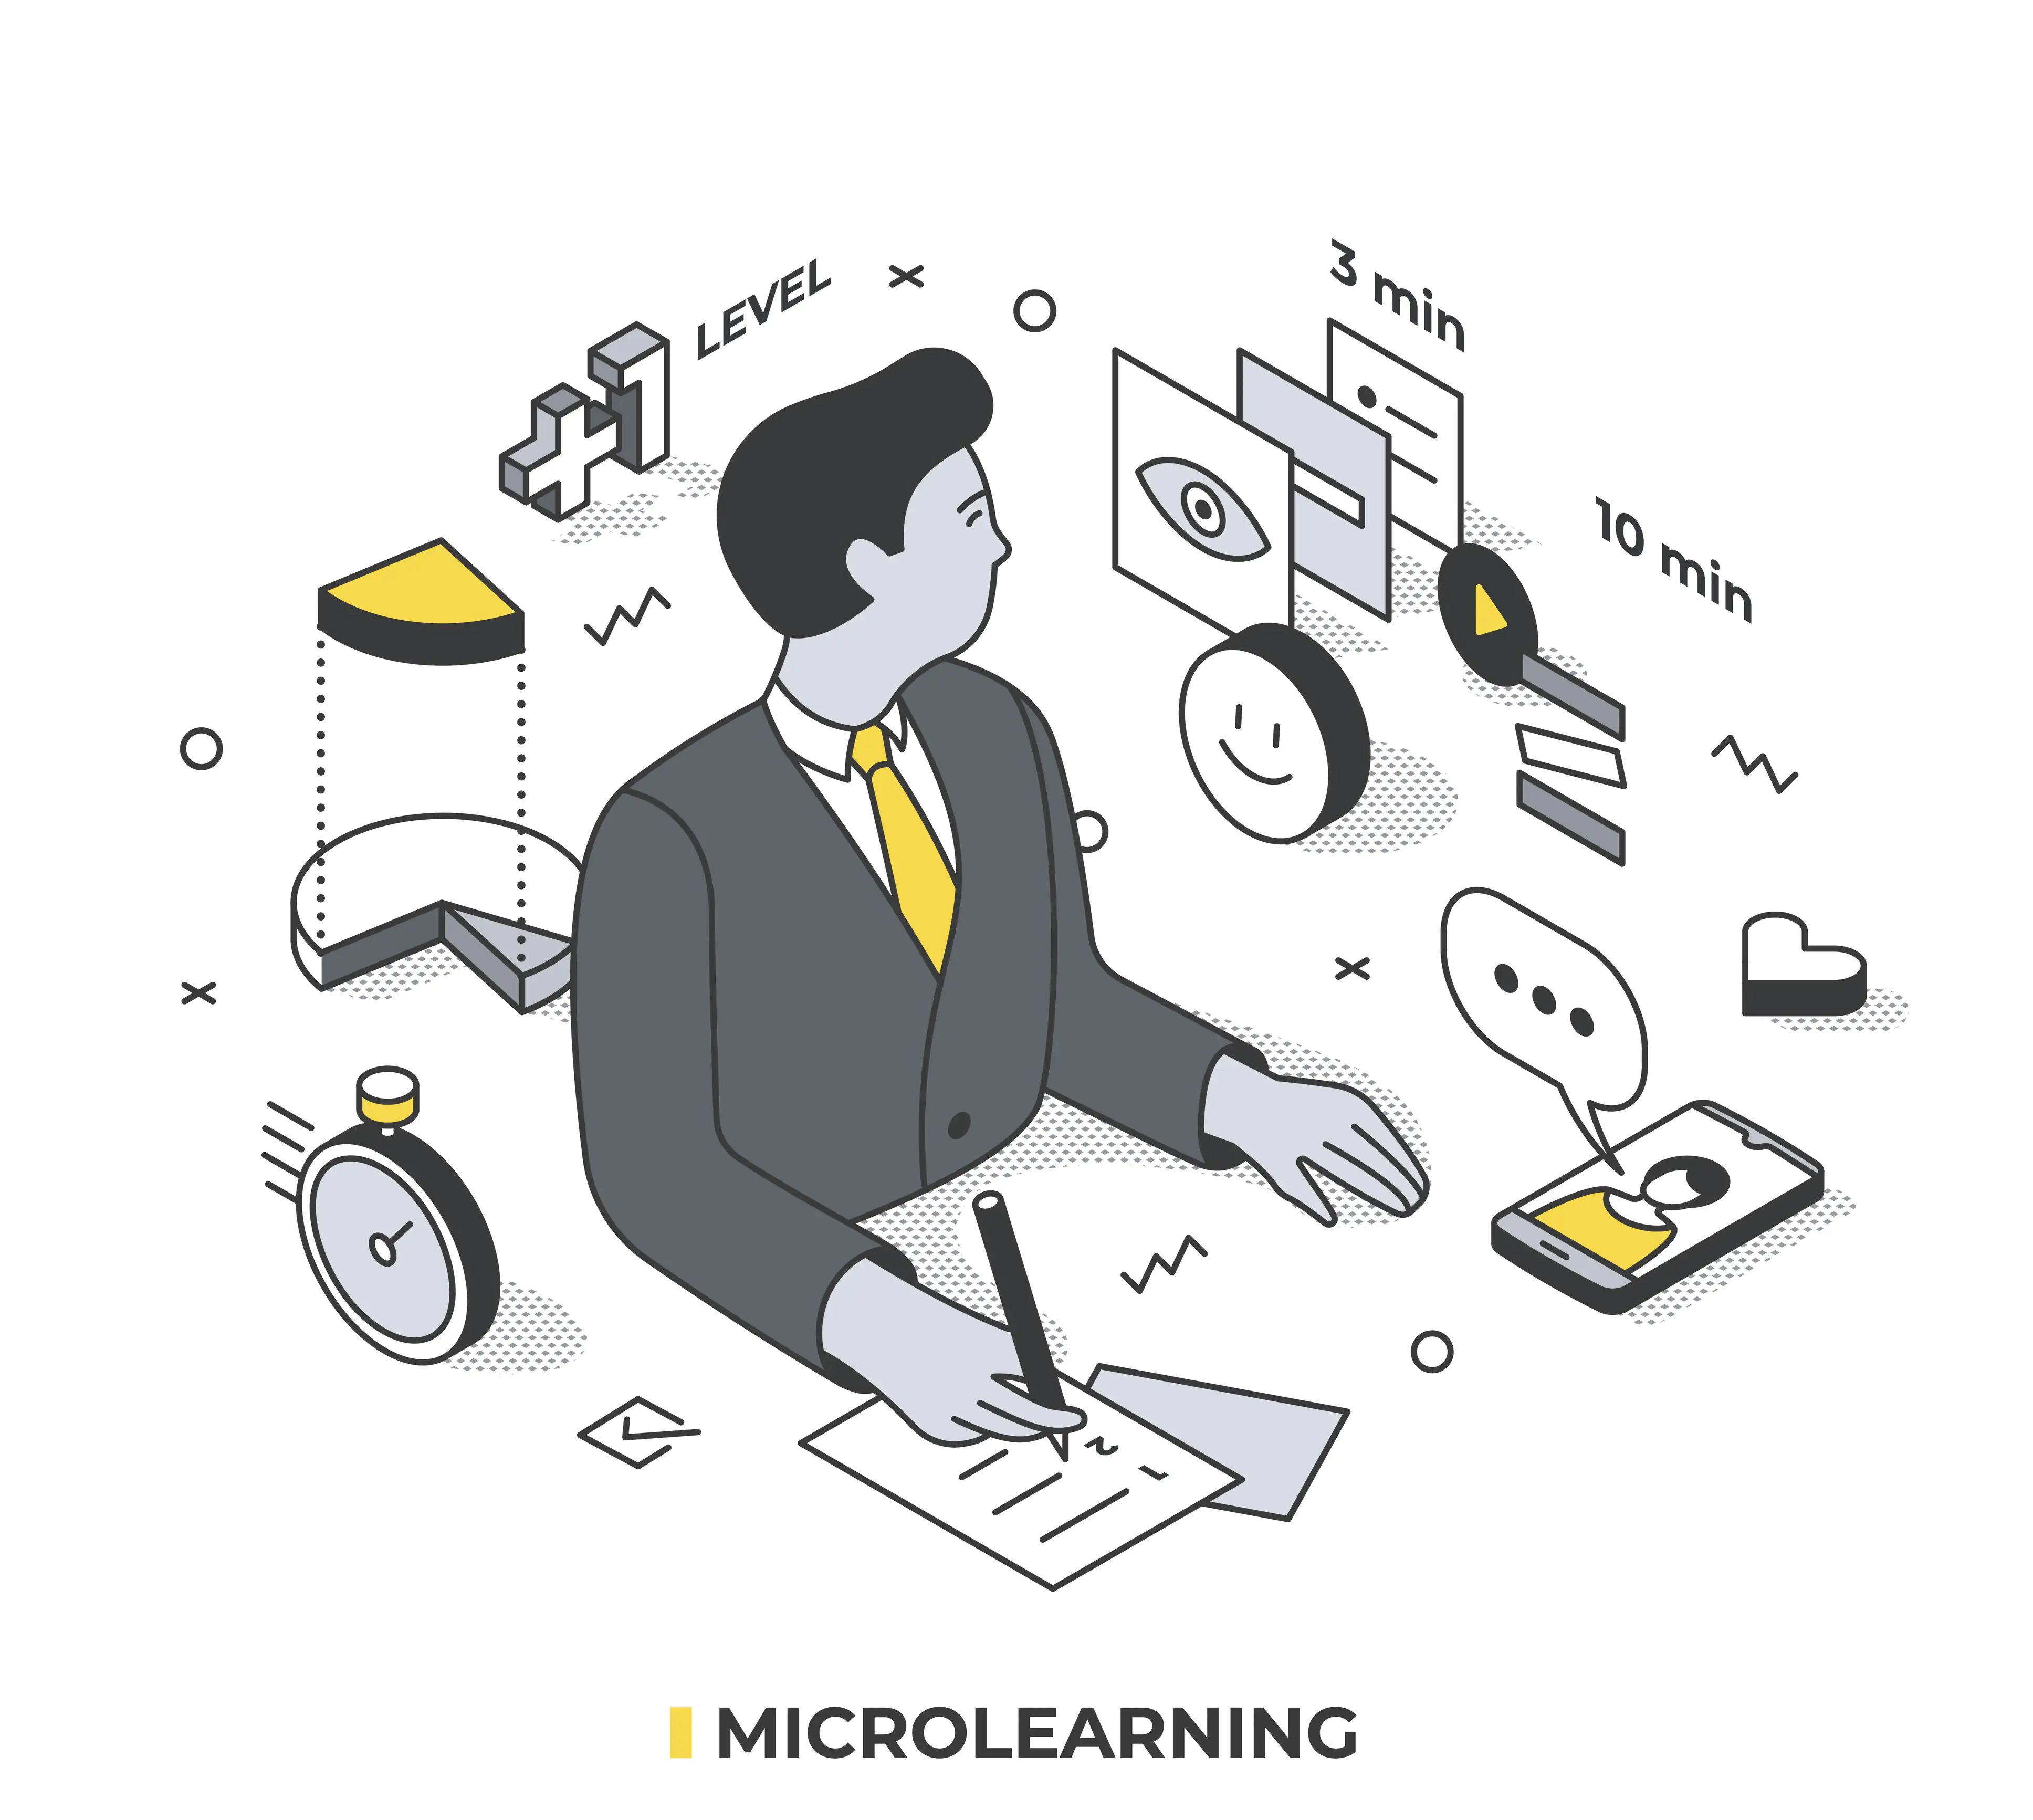 Incorporate Microlearning